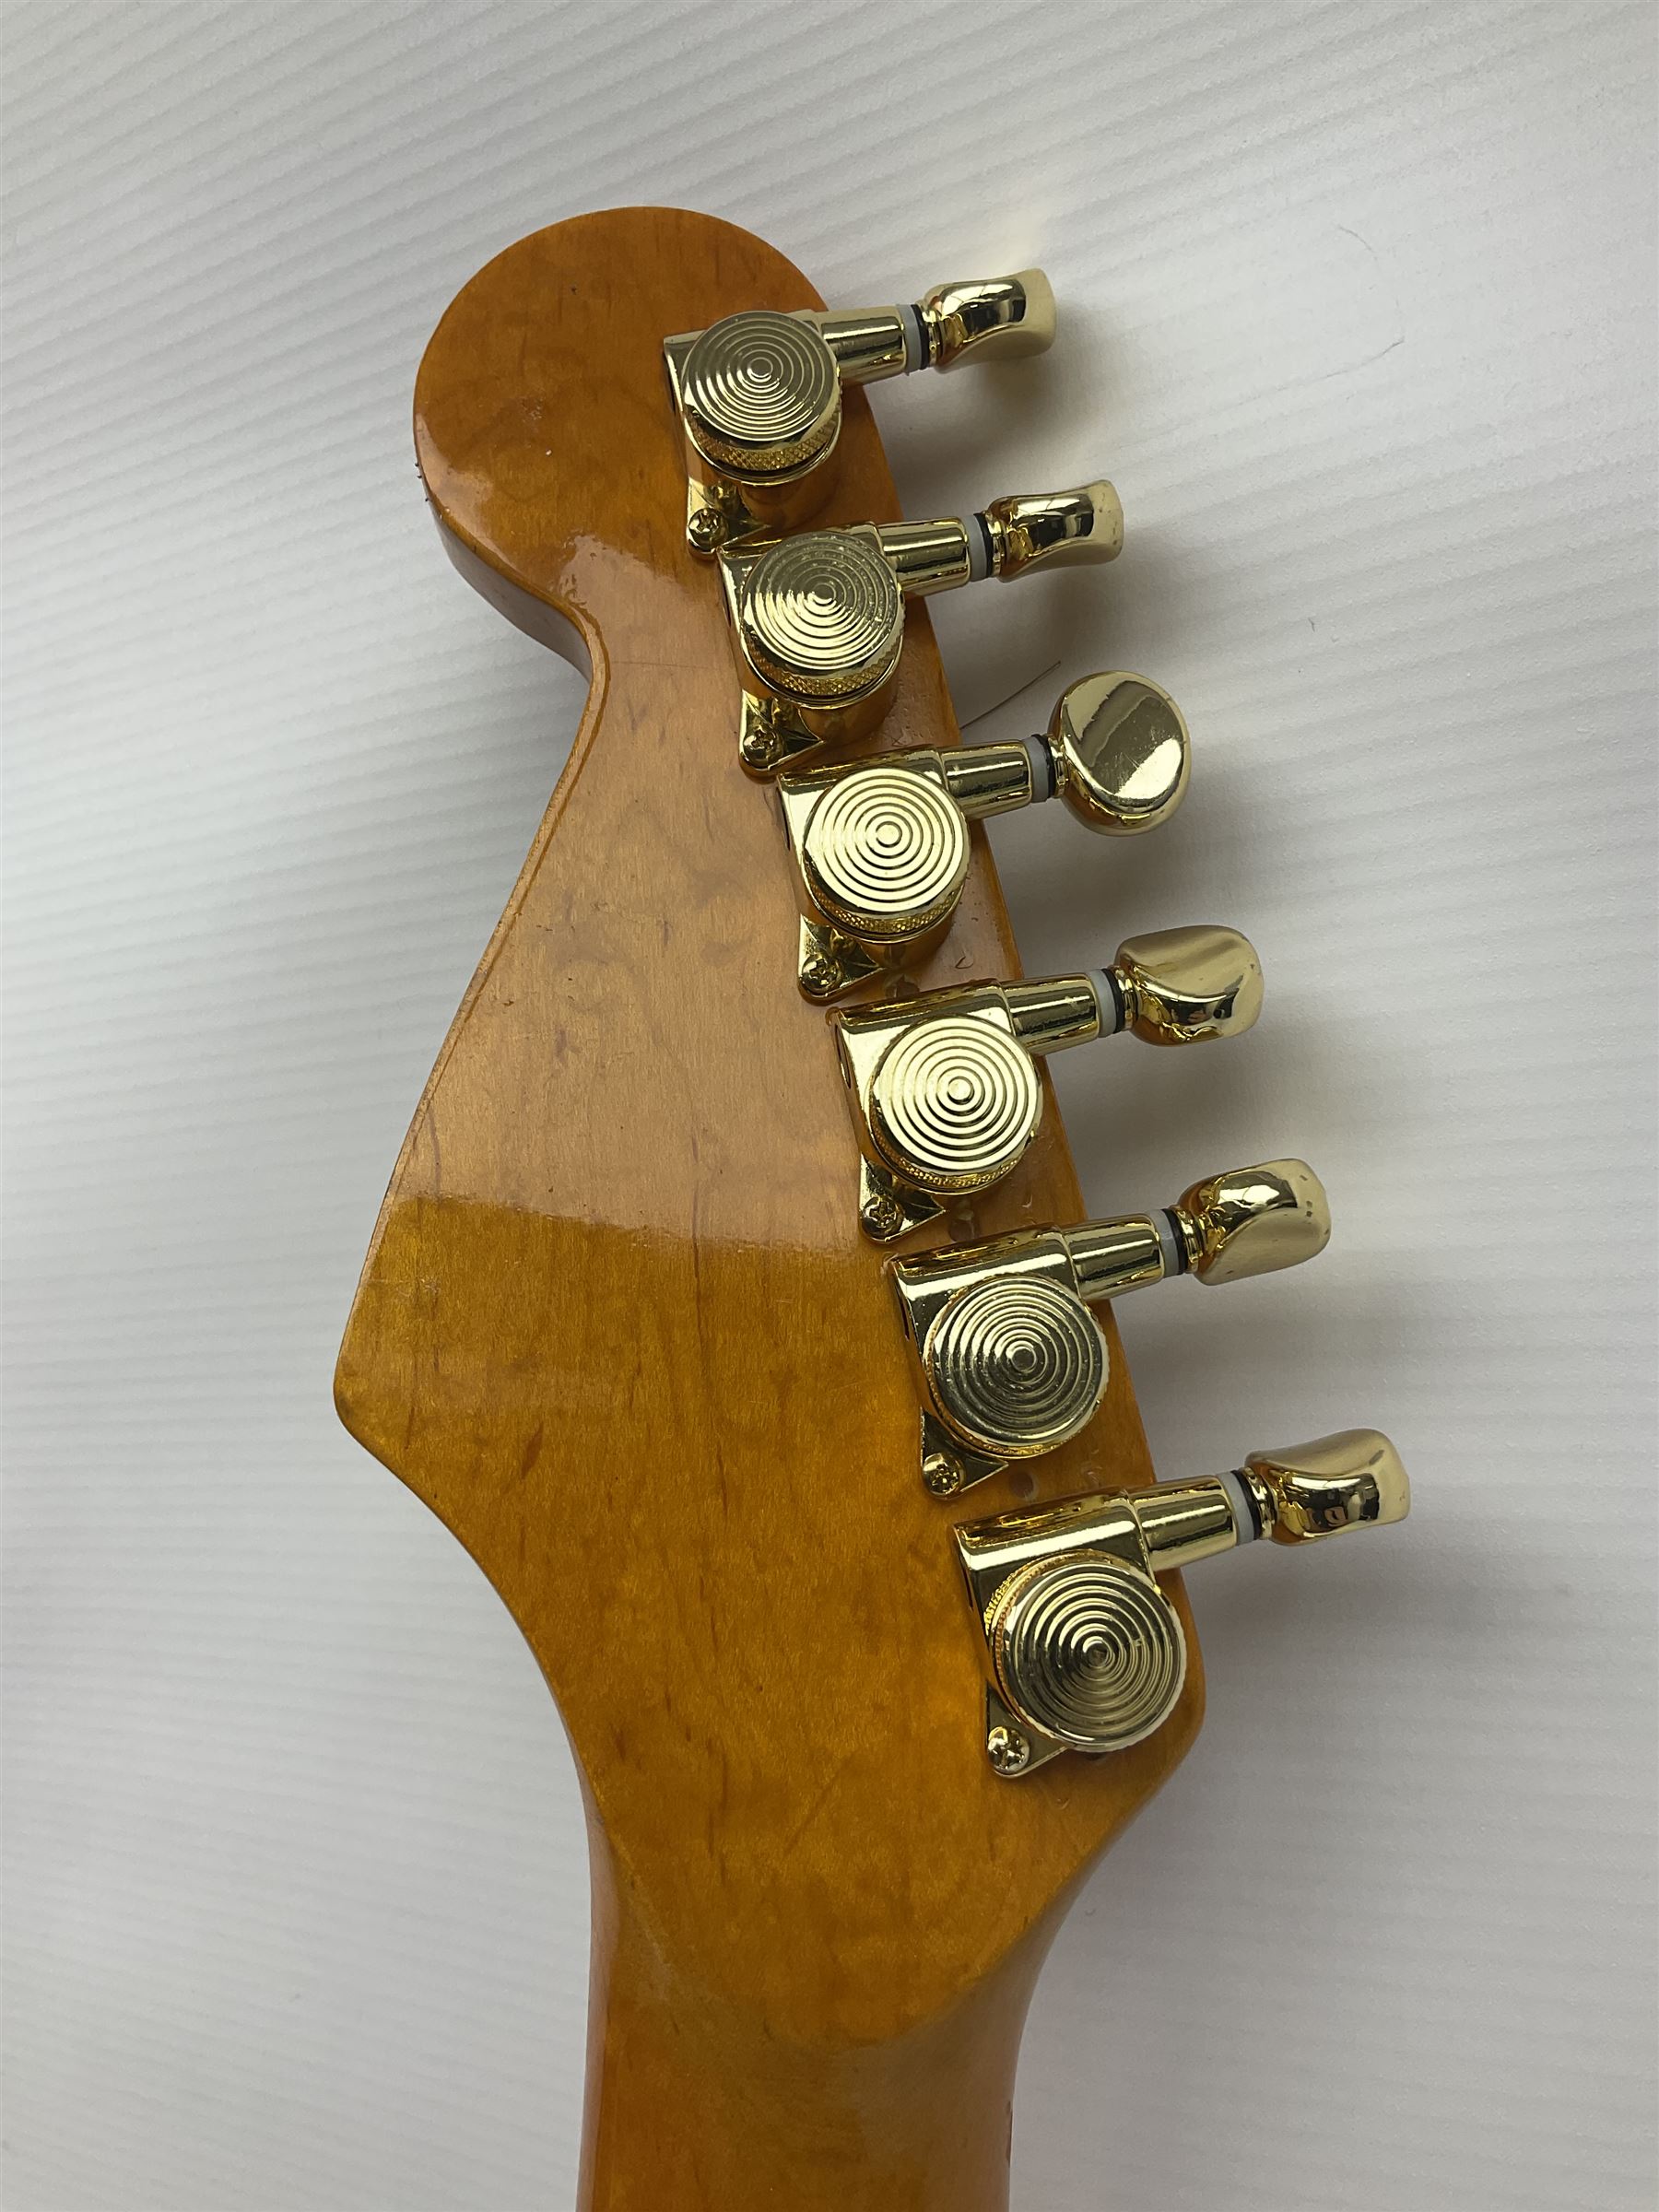 Copy of a Fender Stratocaster electric guitar in black with Wilkinson bridge - Image 10 of 21